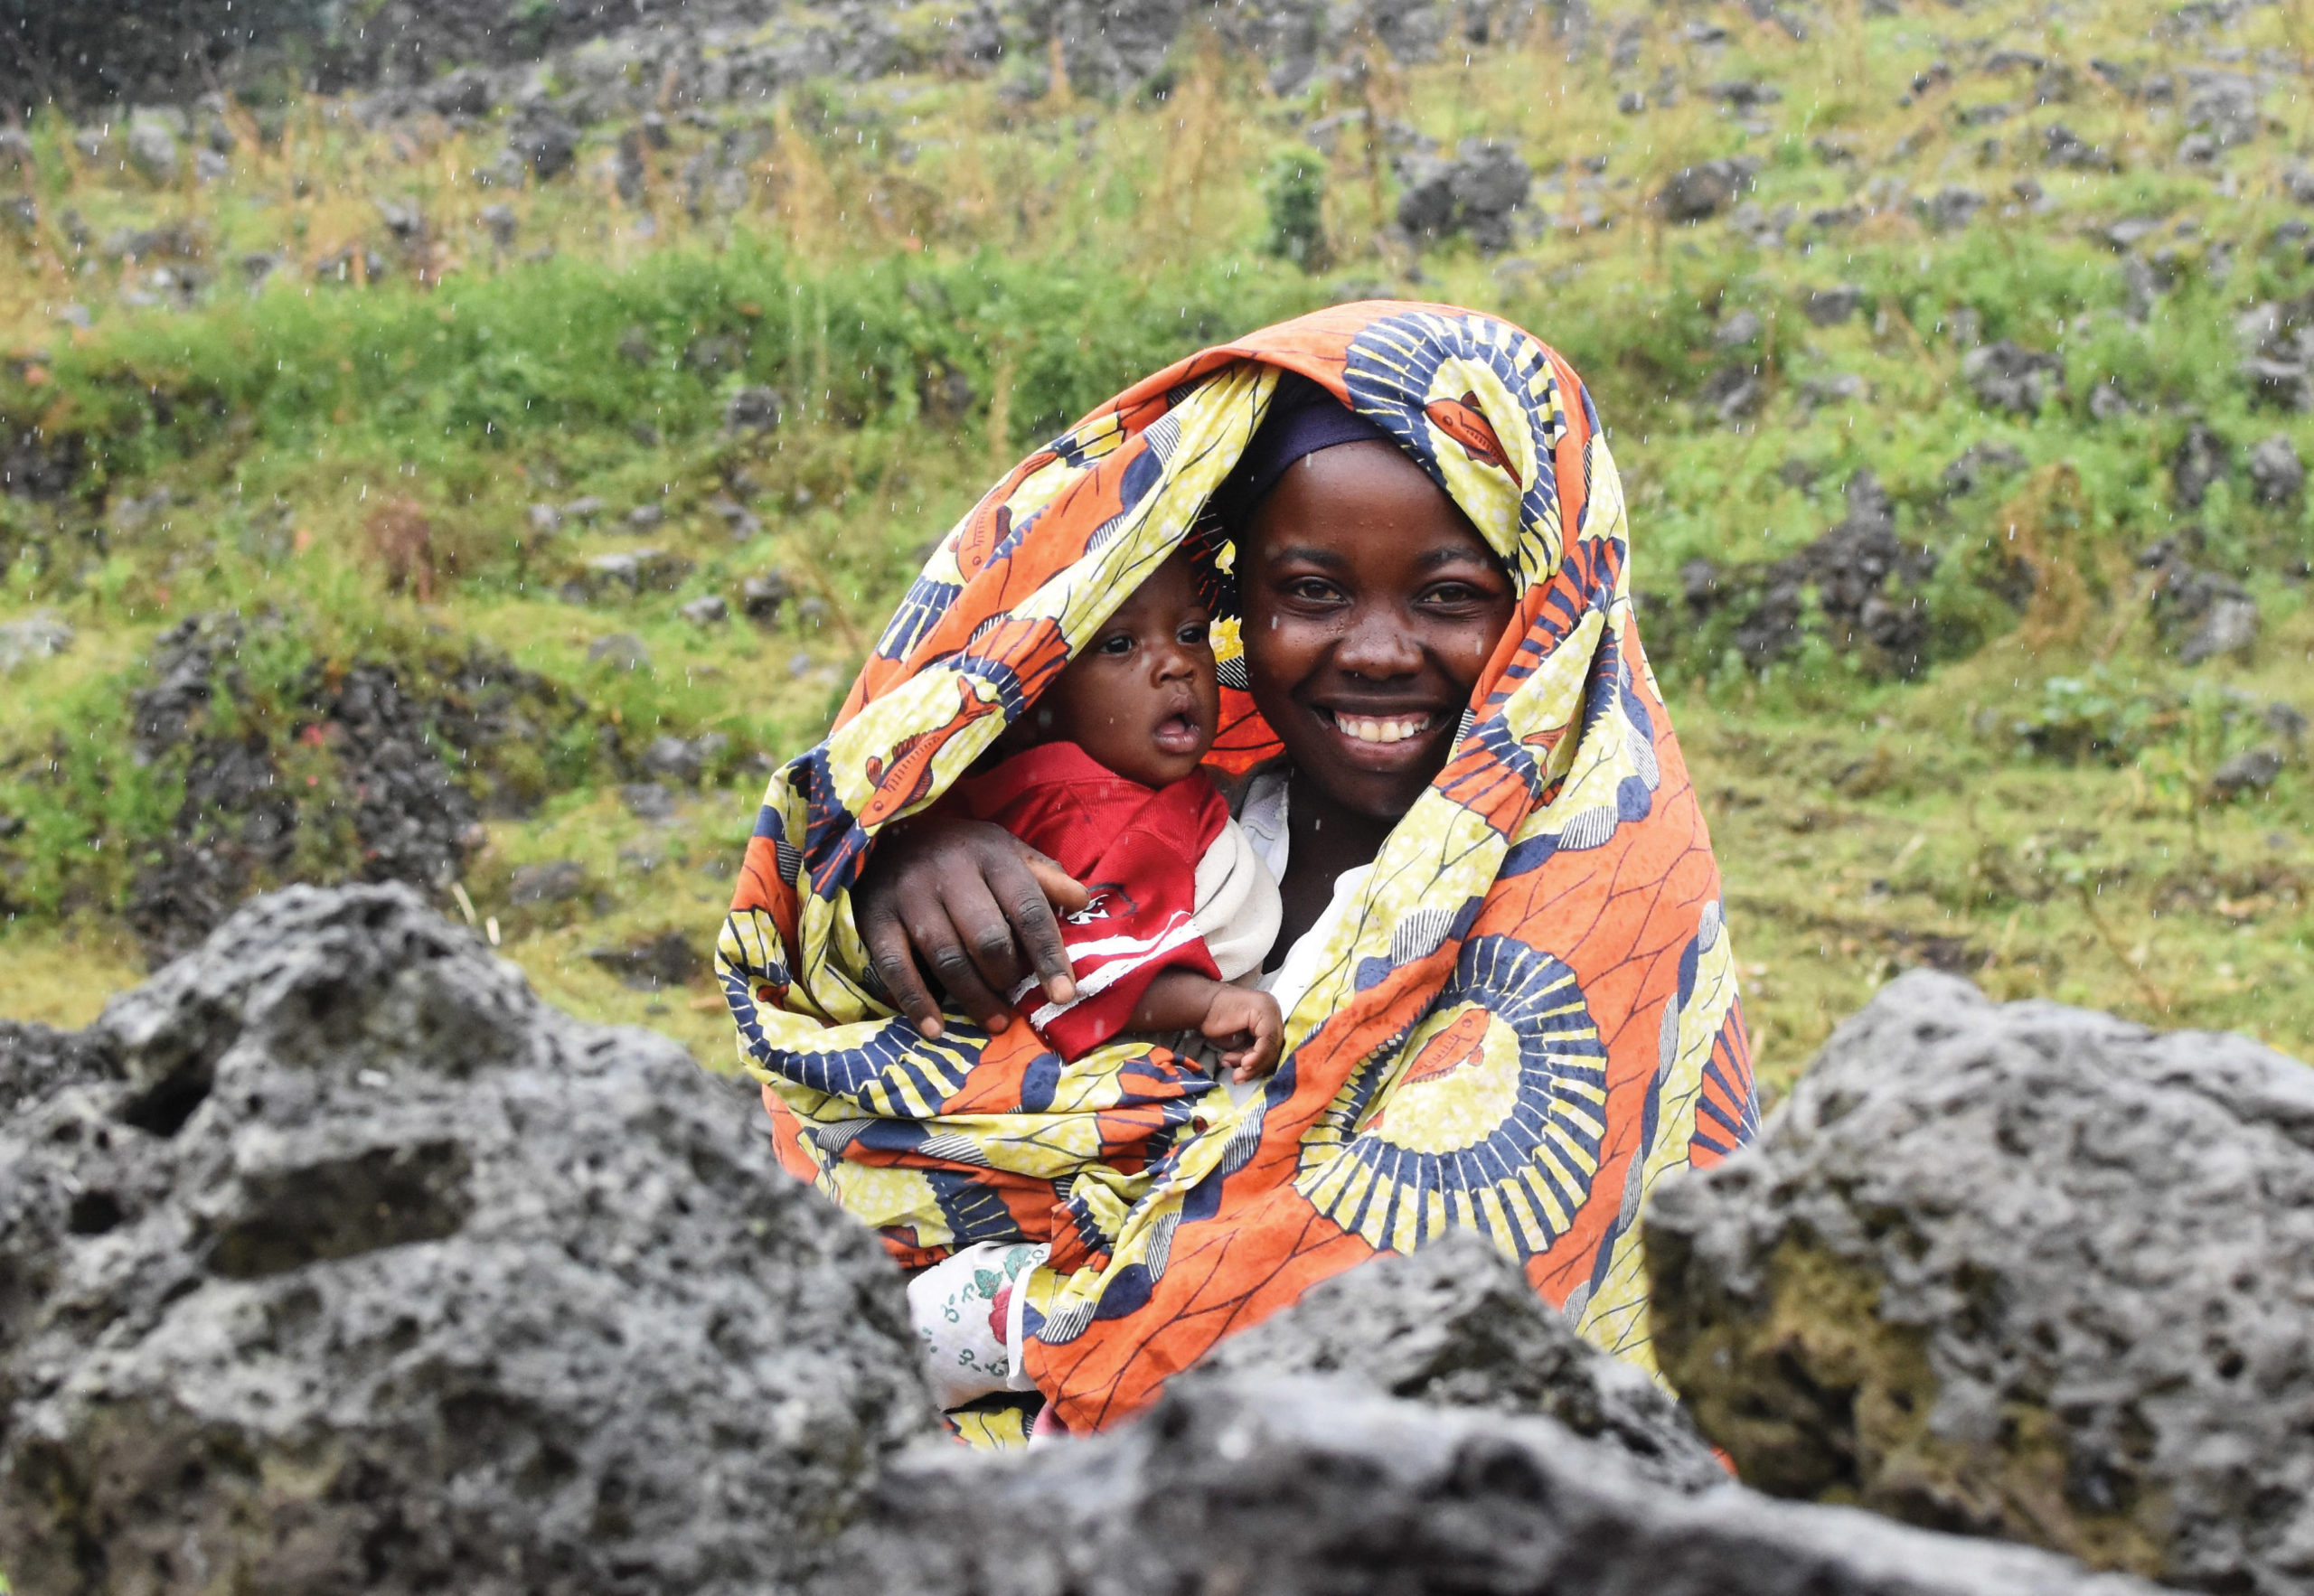 A Rwandan mother and child in the Musanze District.